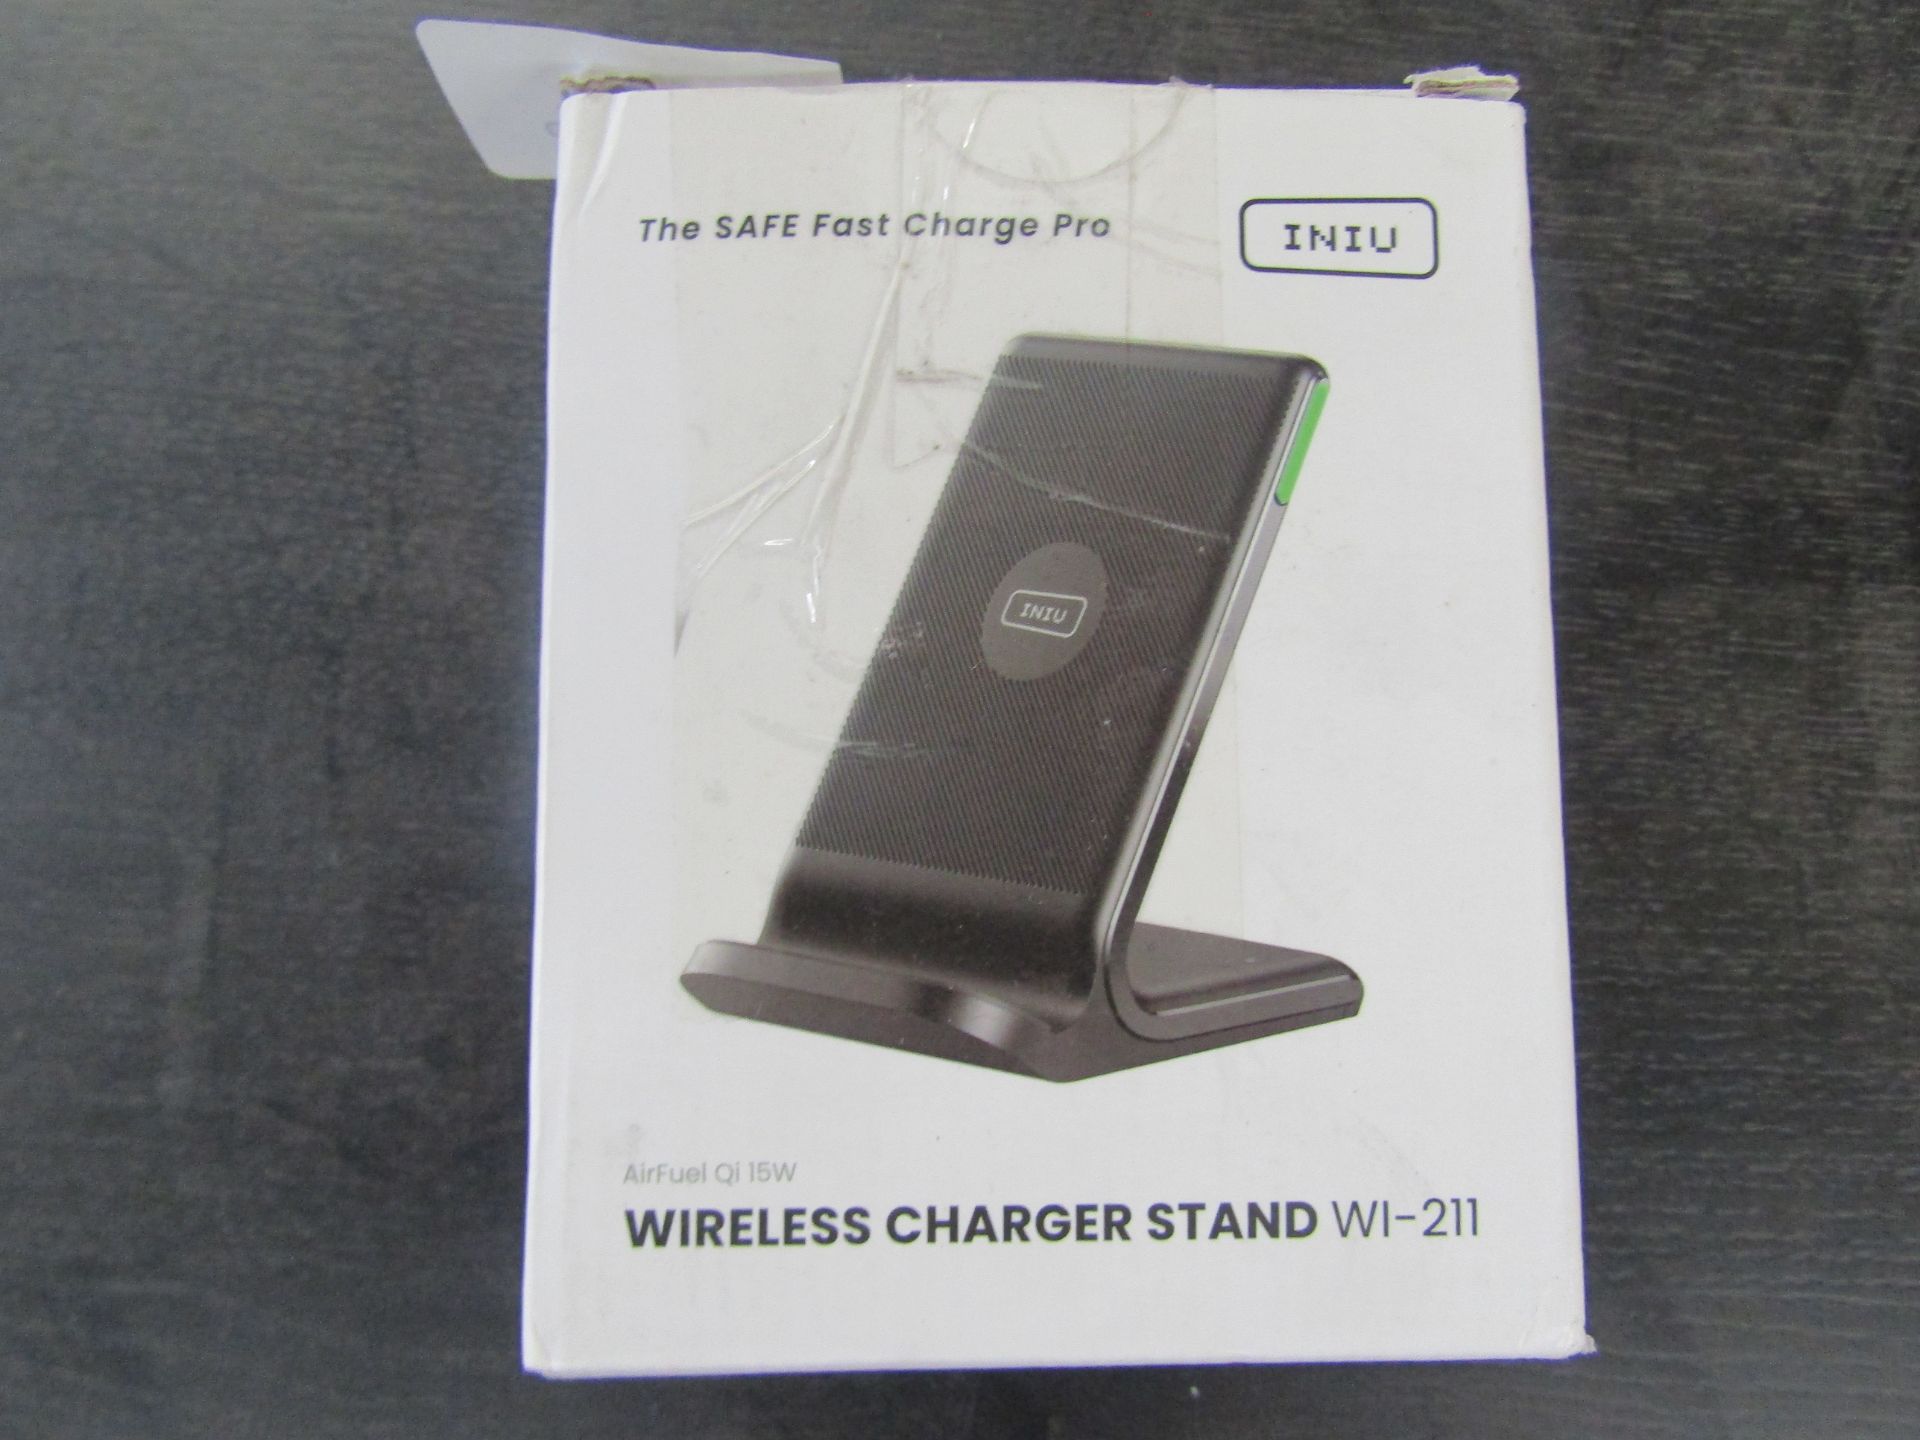 INIU Airfuel QI 15w Wireless Charging Stand WI-211 - Unchecked & Boxed.